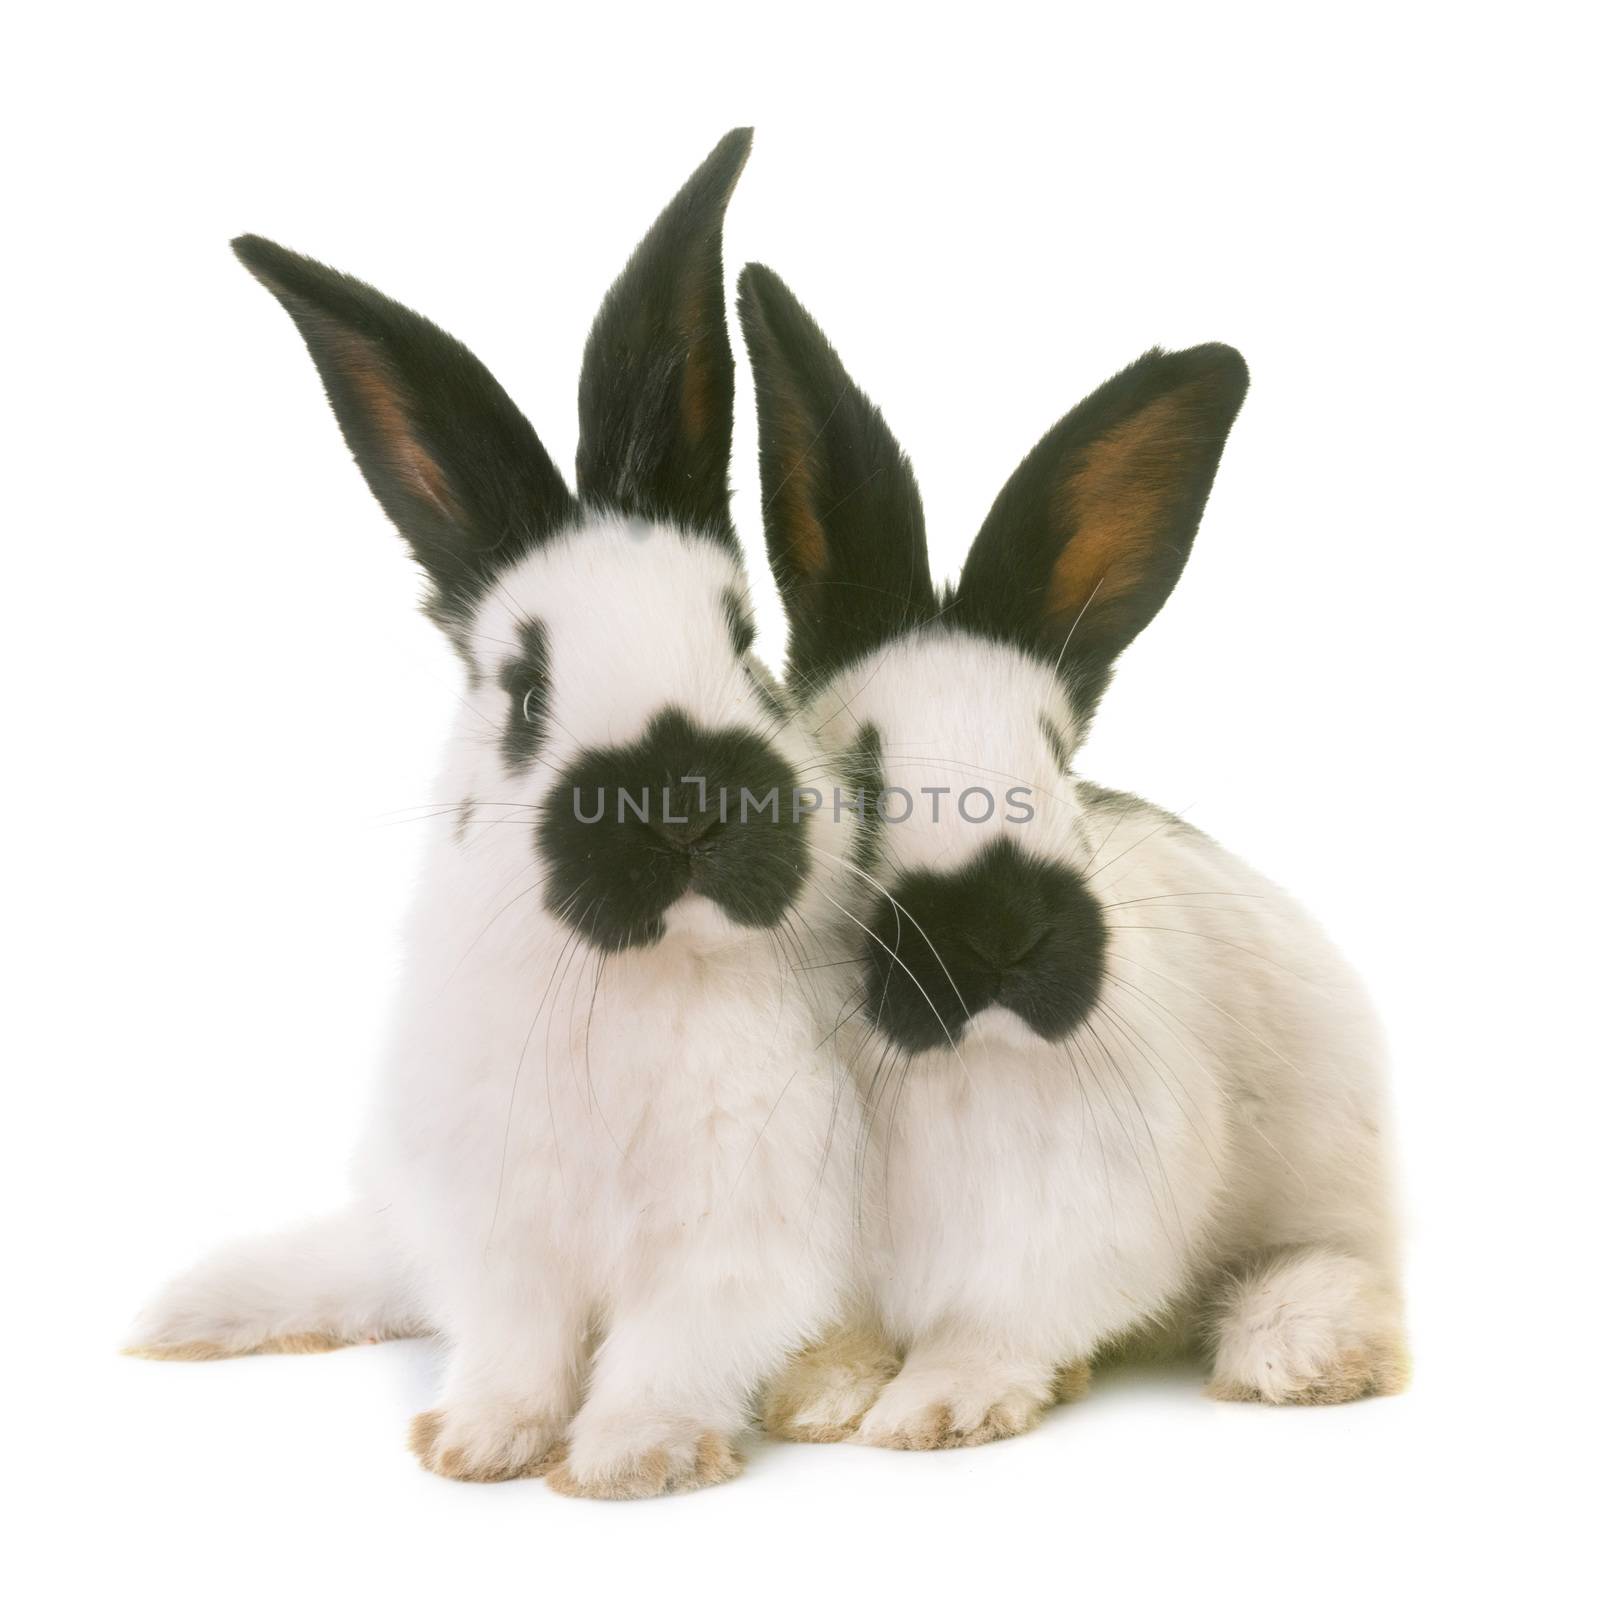 young Checkered Giant rabbits by cynoclub